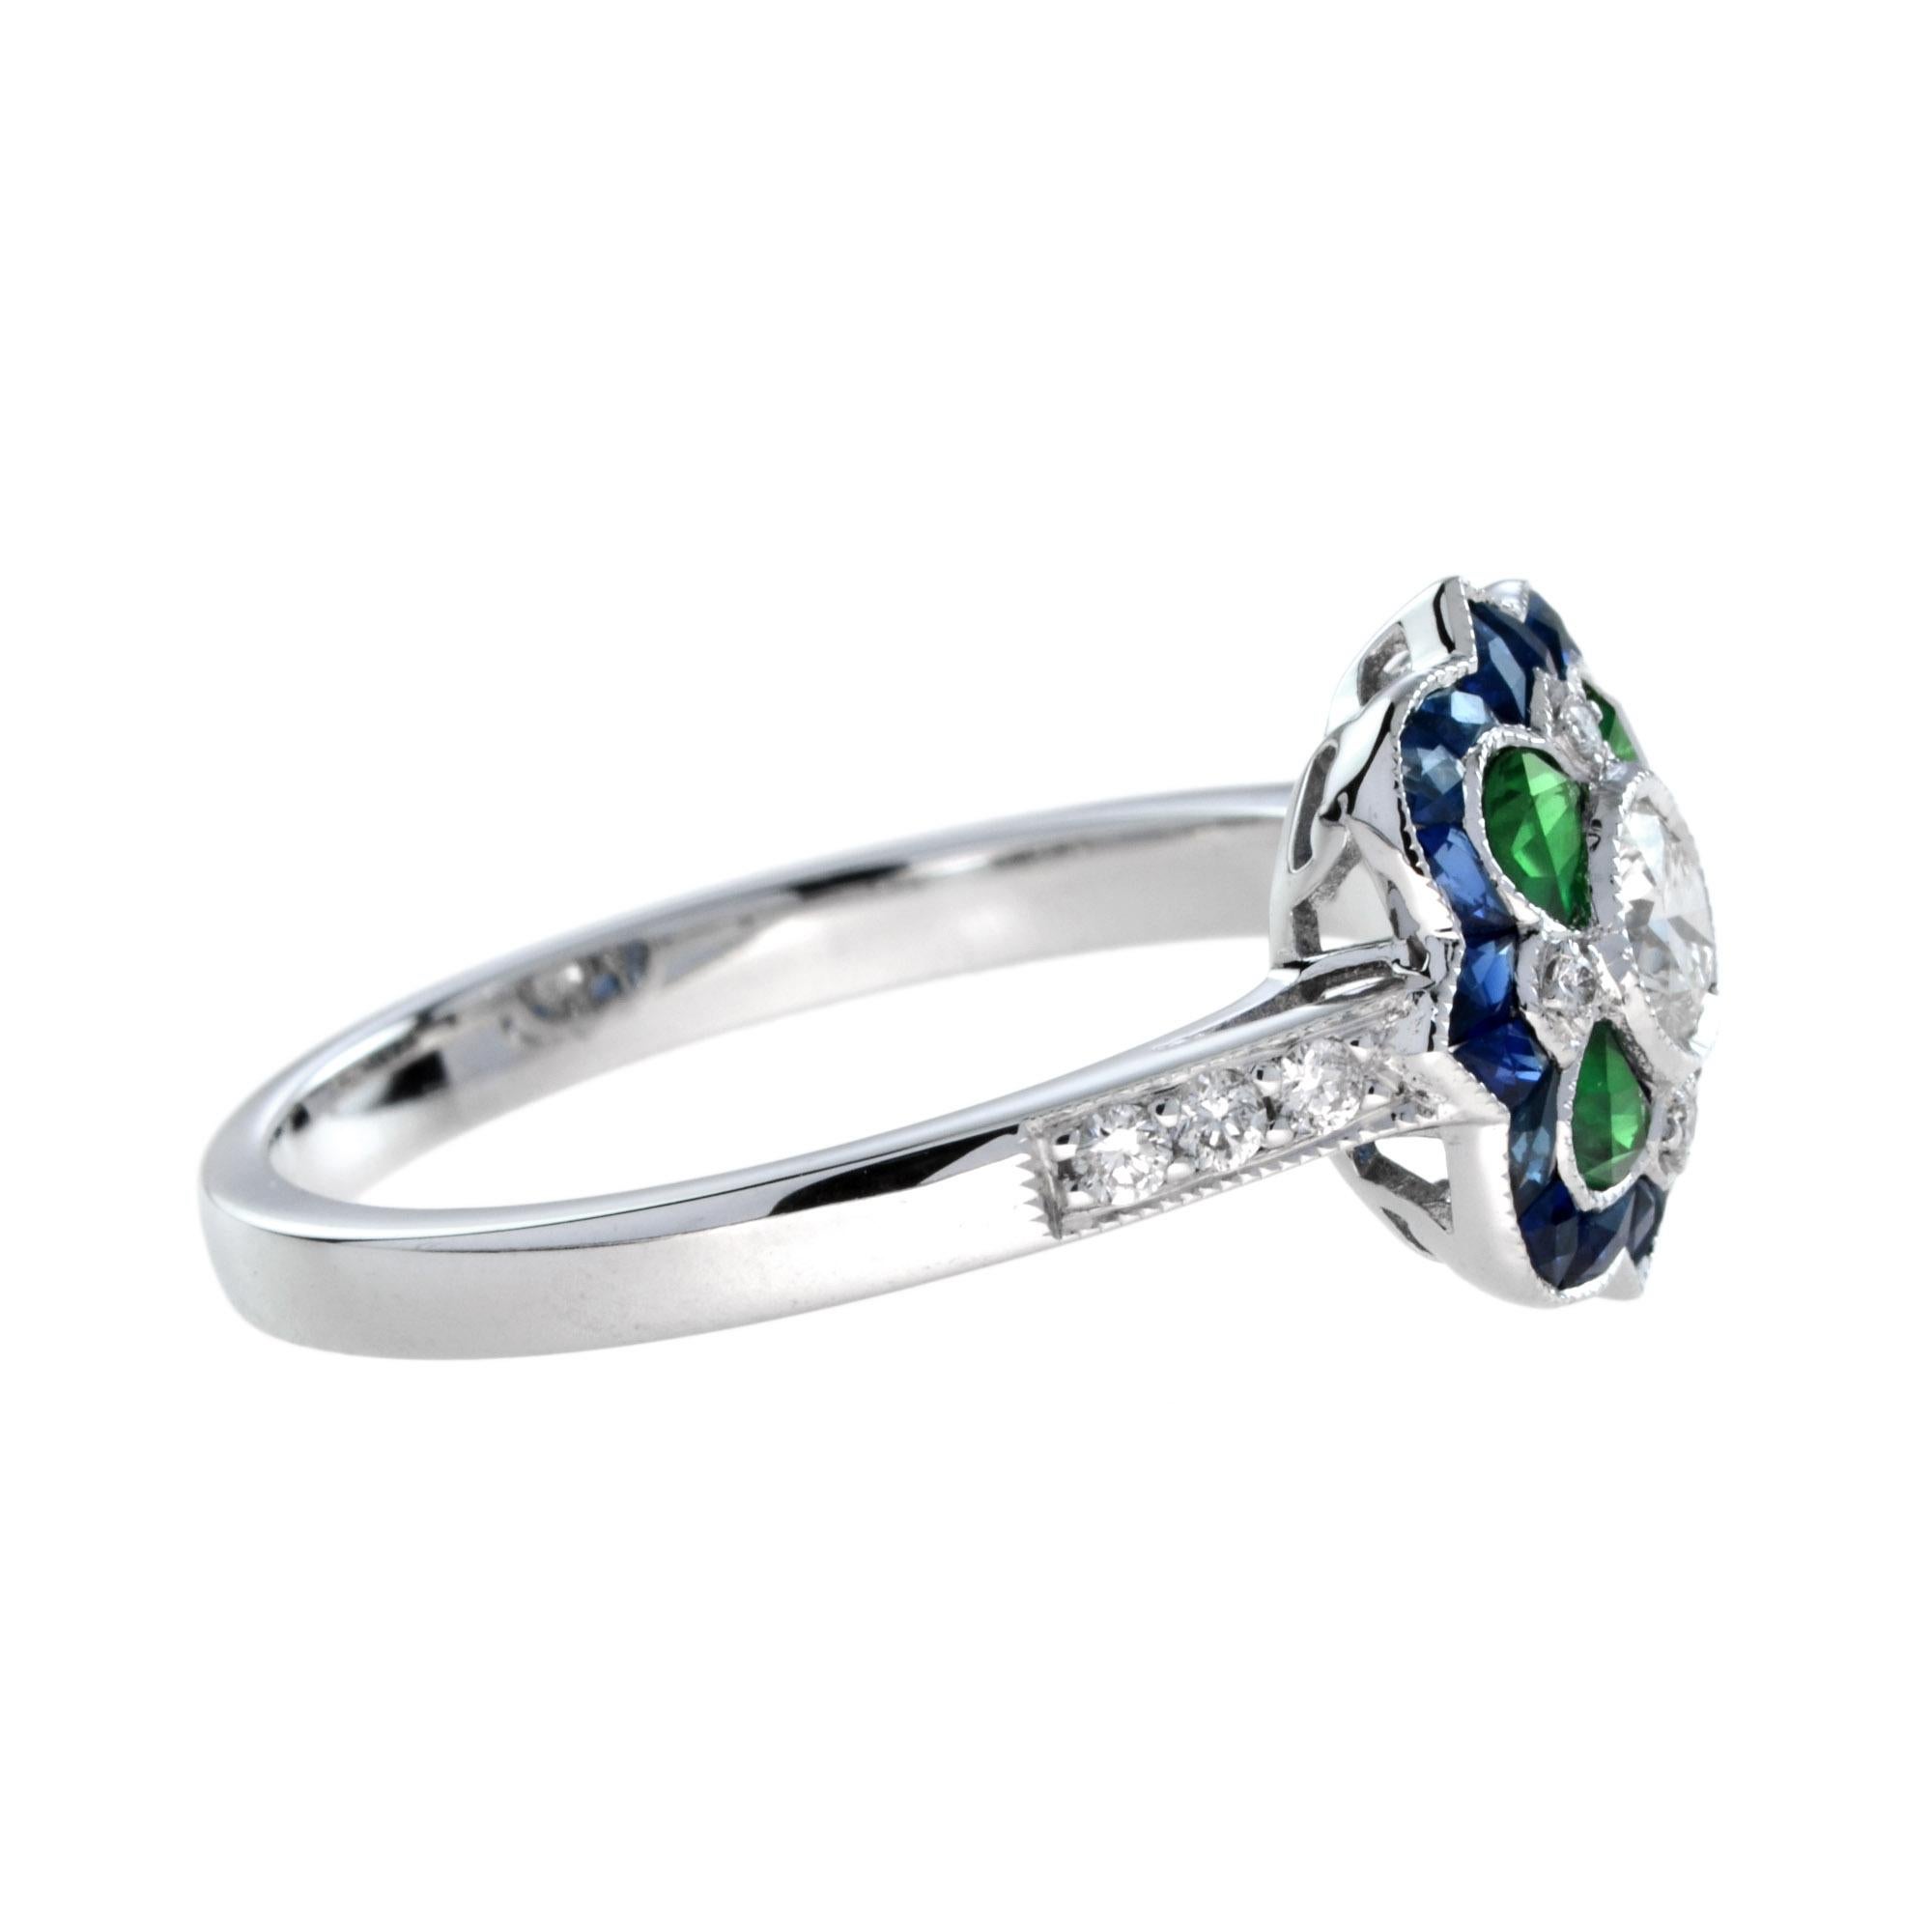 For Sale:  Art Deco Style Diamond with Emerald and Sapphire Ring in 18K White Gold 4